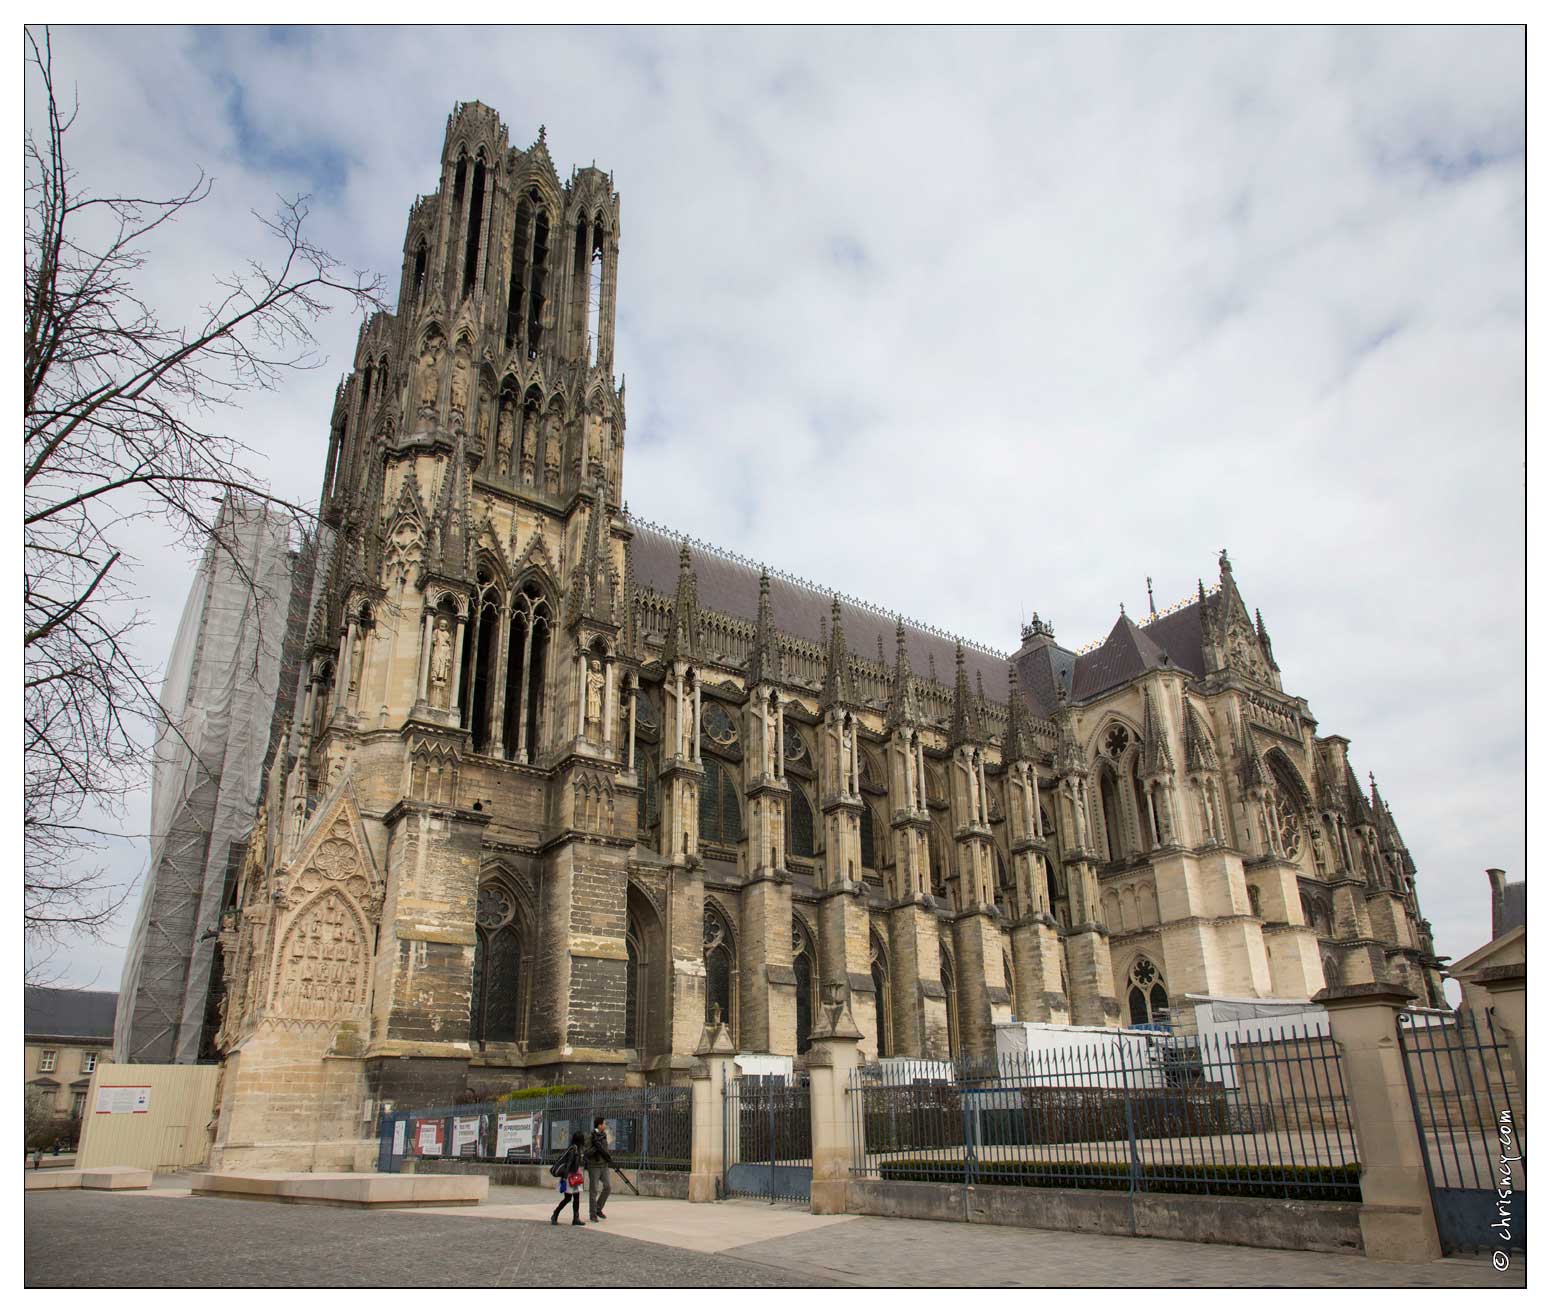 20150406-08_0178-Reims_Cathedrale__pano.jpg